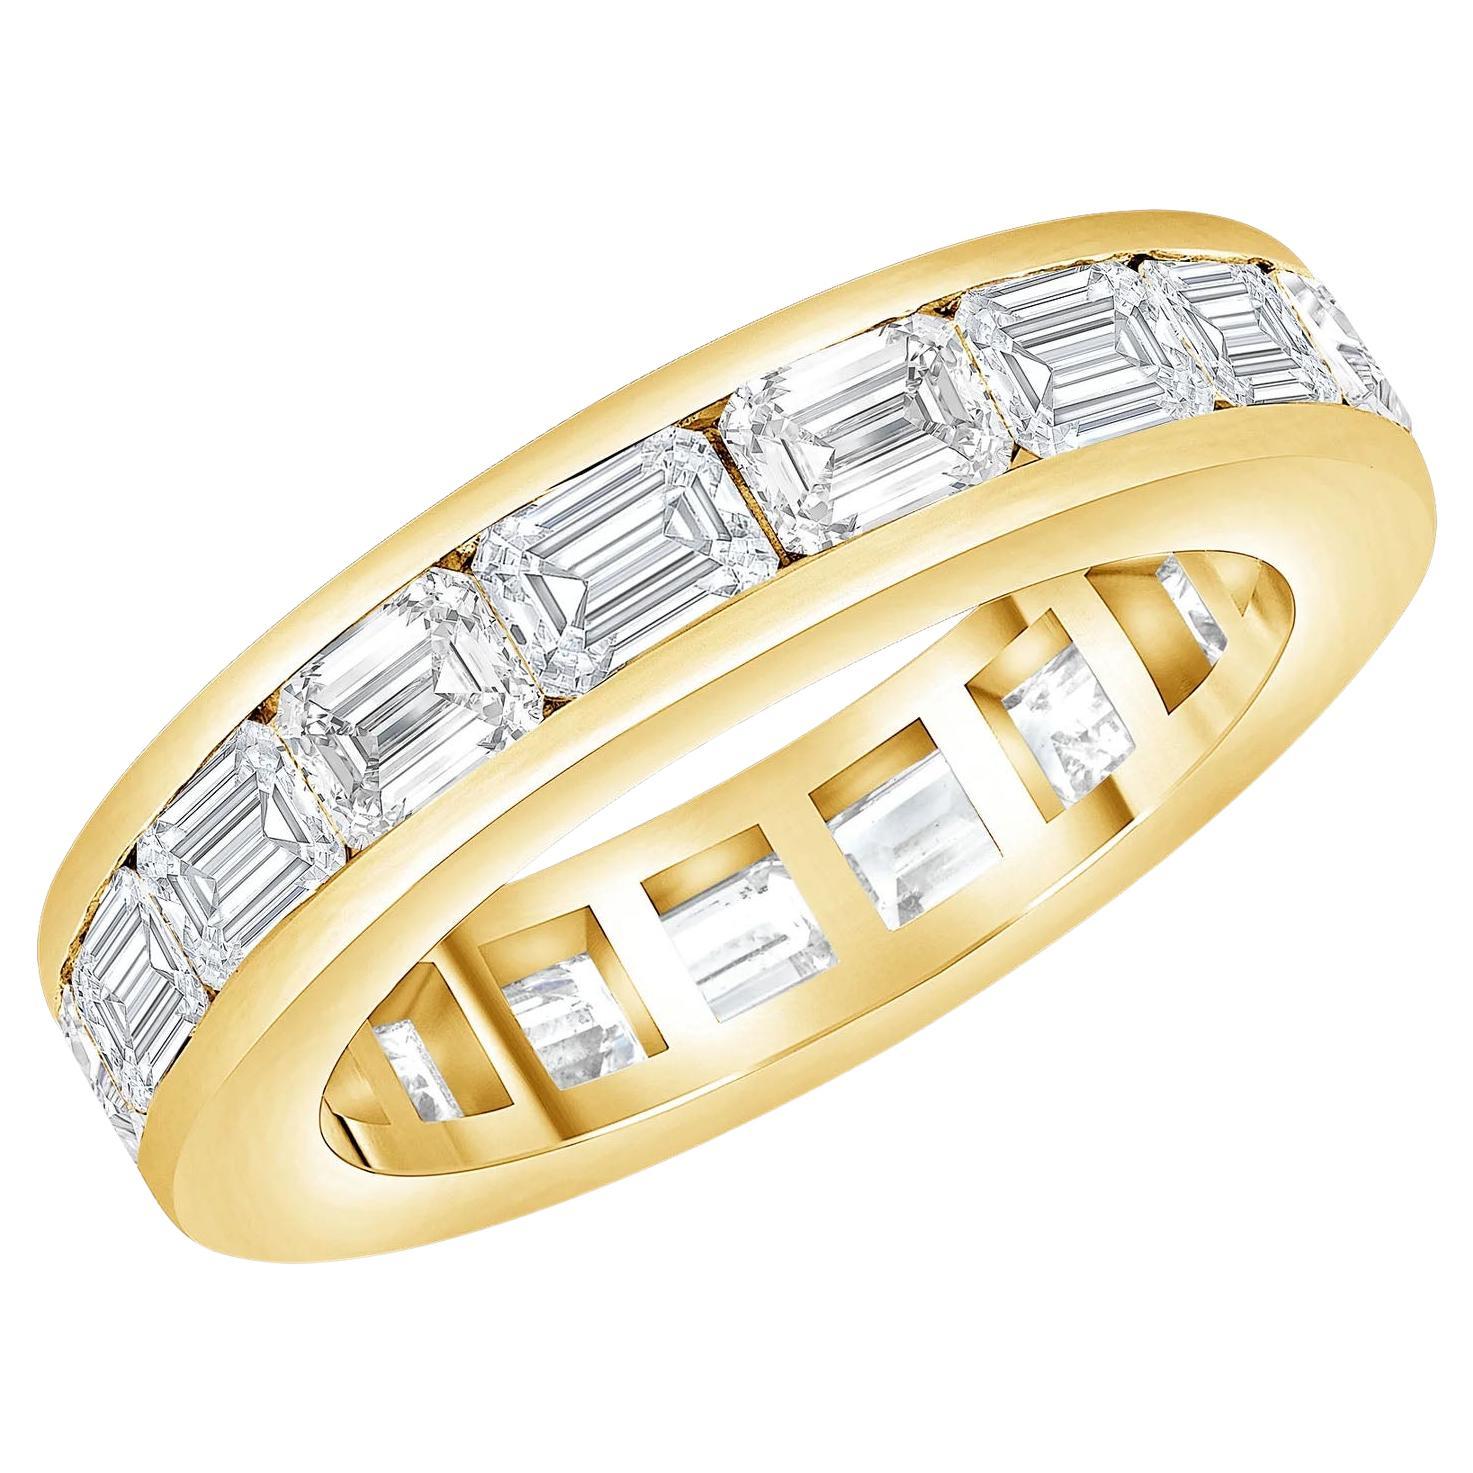 Makenzie's Eternity Band - East West Channel Set